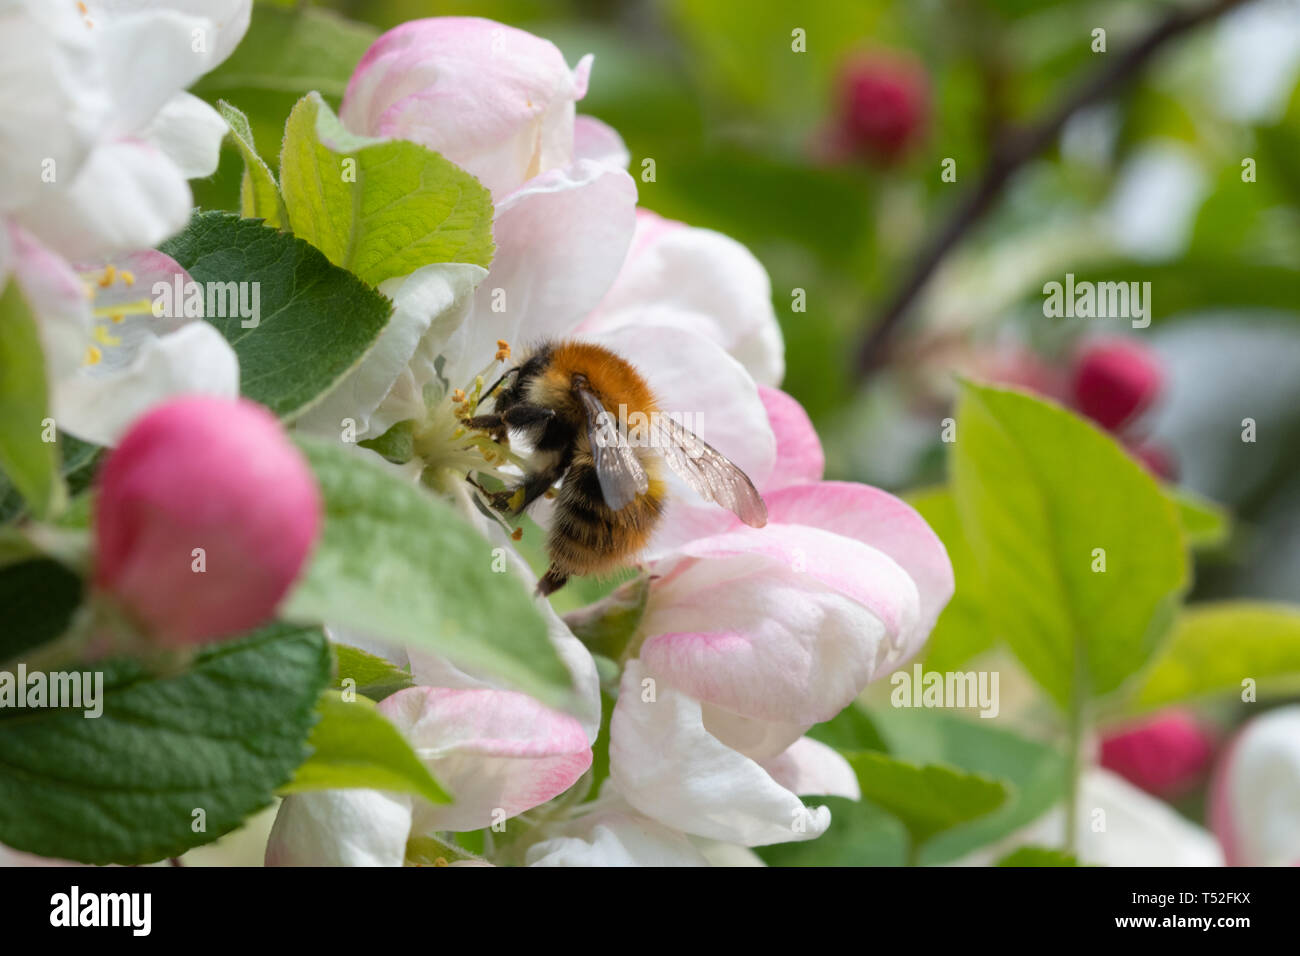 Honeybee collecting nectar and pollen from apple blossom during spring (April), UK. Fruit tree pollination. Stock Photo